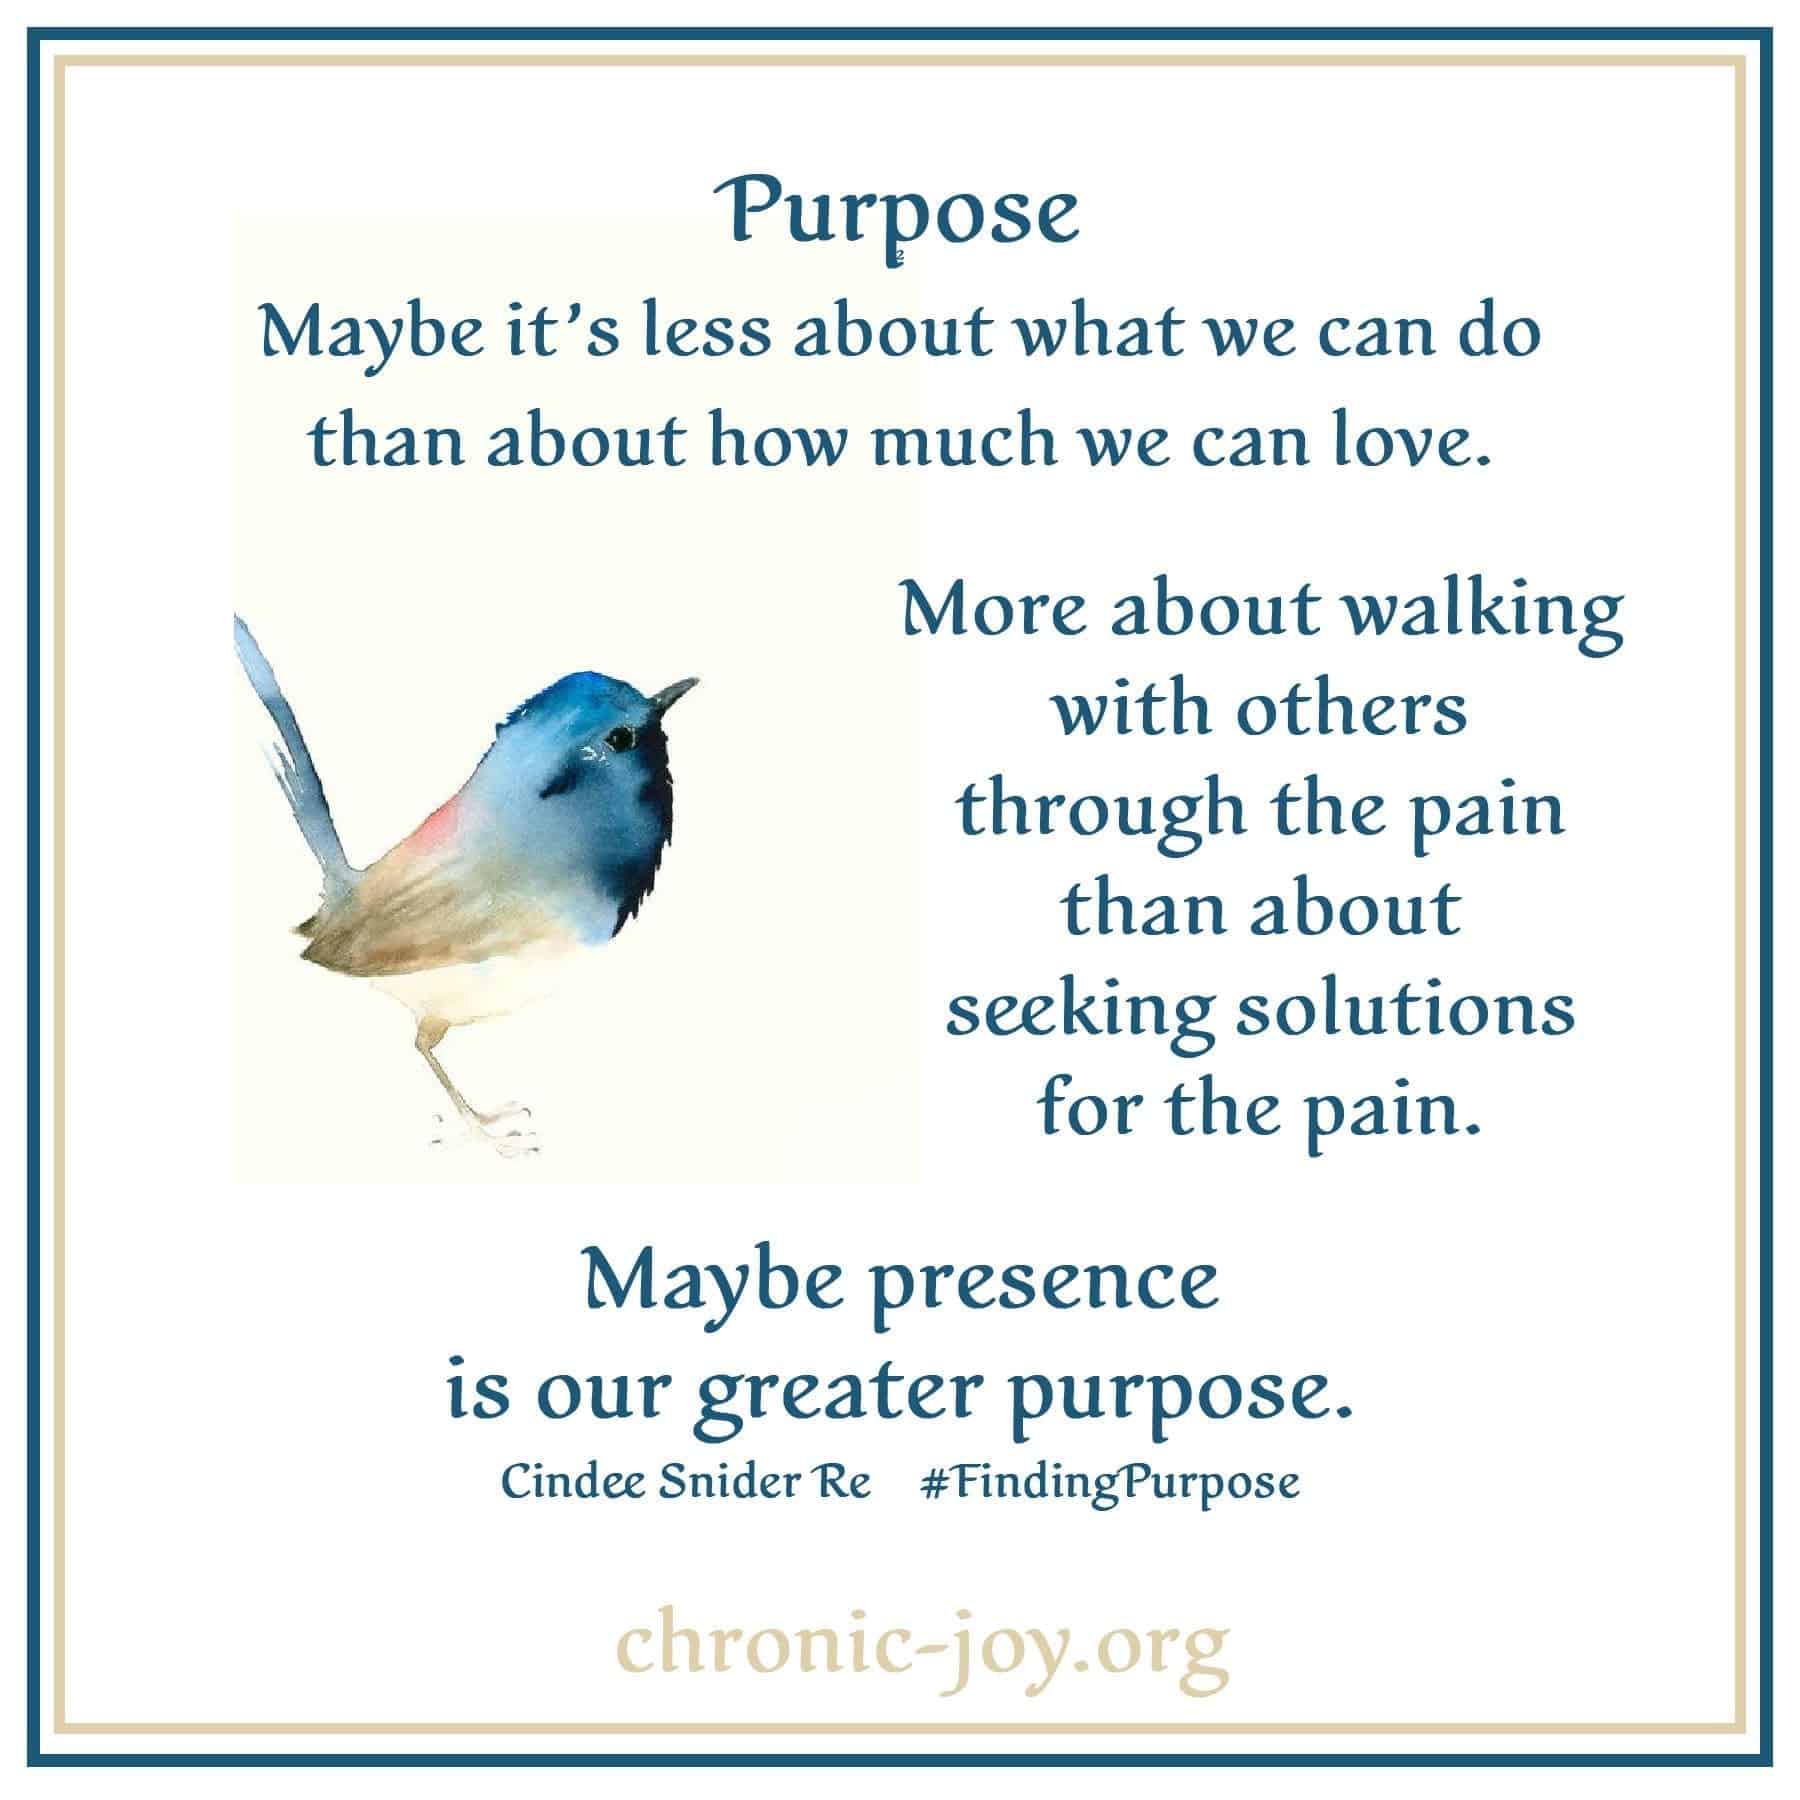 Purpose - Maybe it's less about what we can do...